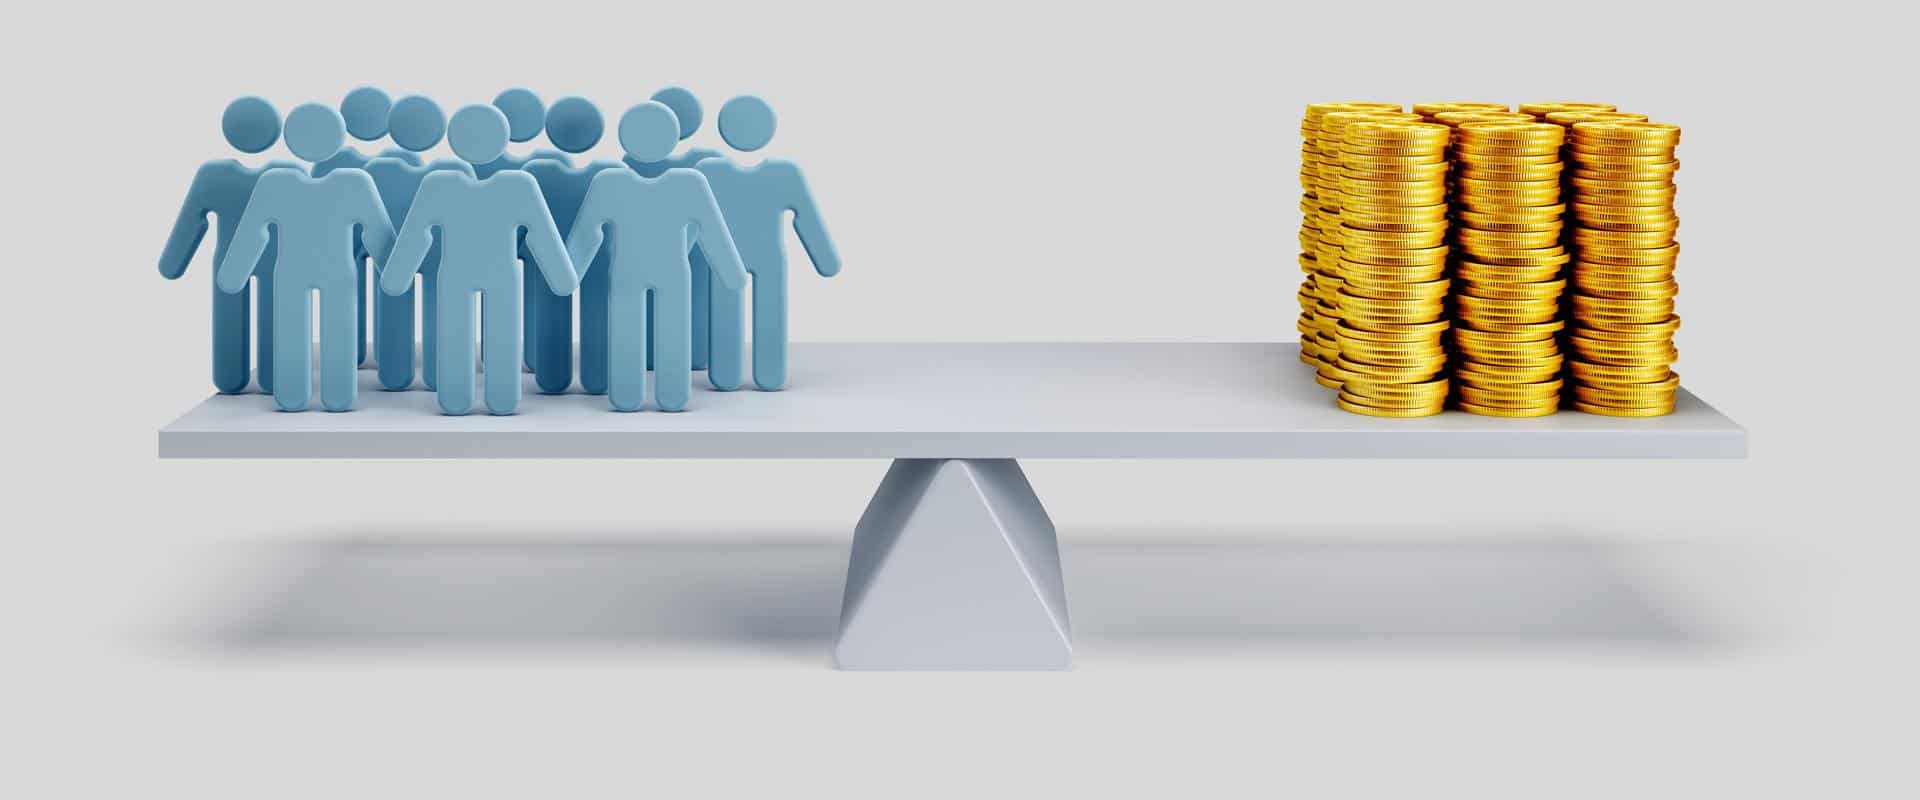 A graphic representation of a balanced scale with humanoid figures on one side and stacks of coins on the other, depicting a concept of value or equality.